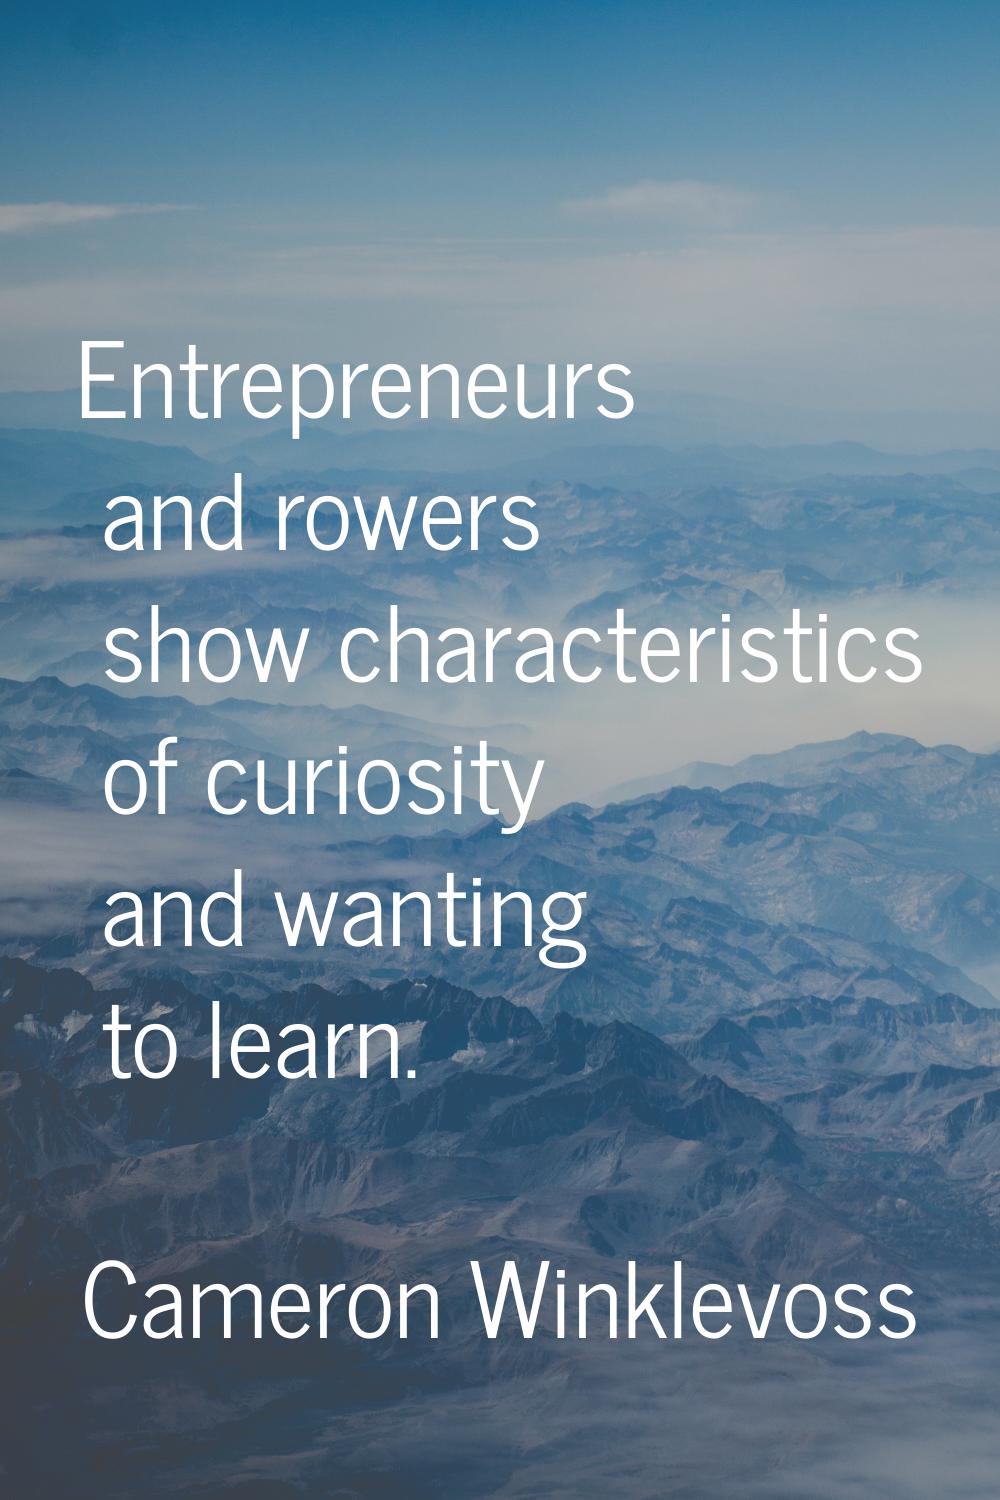 Entrepreneurs and rowers show characteristics of curiosity and wanting to learn.